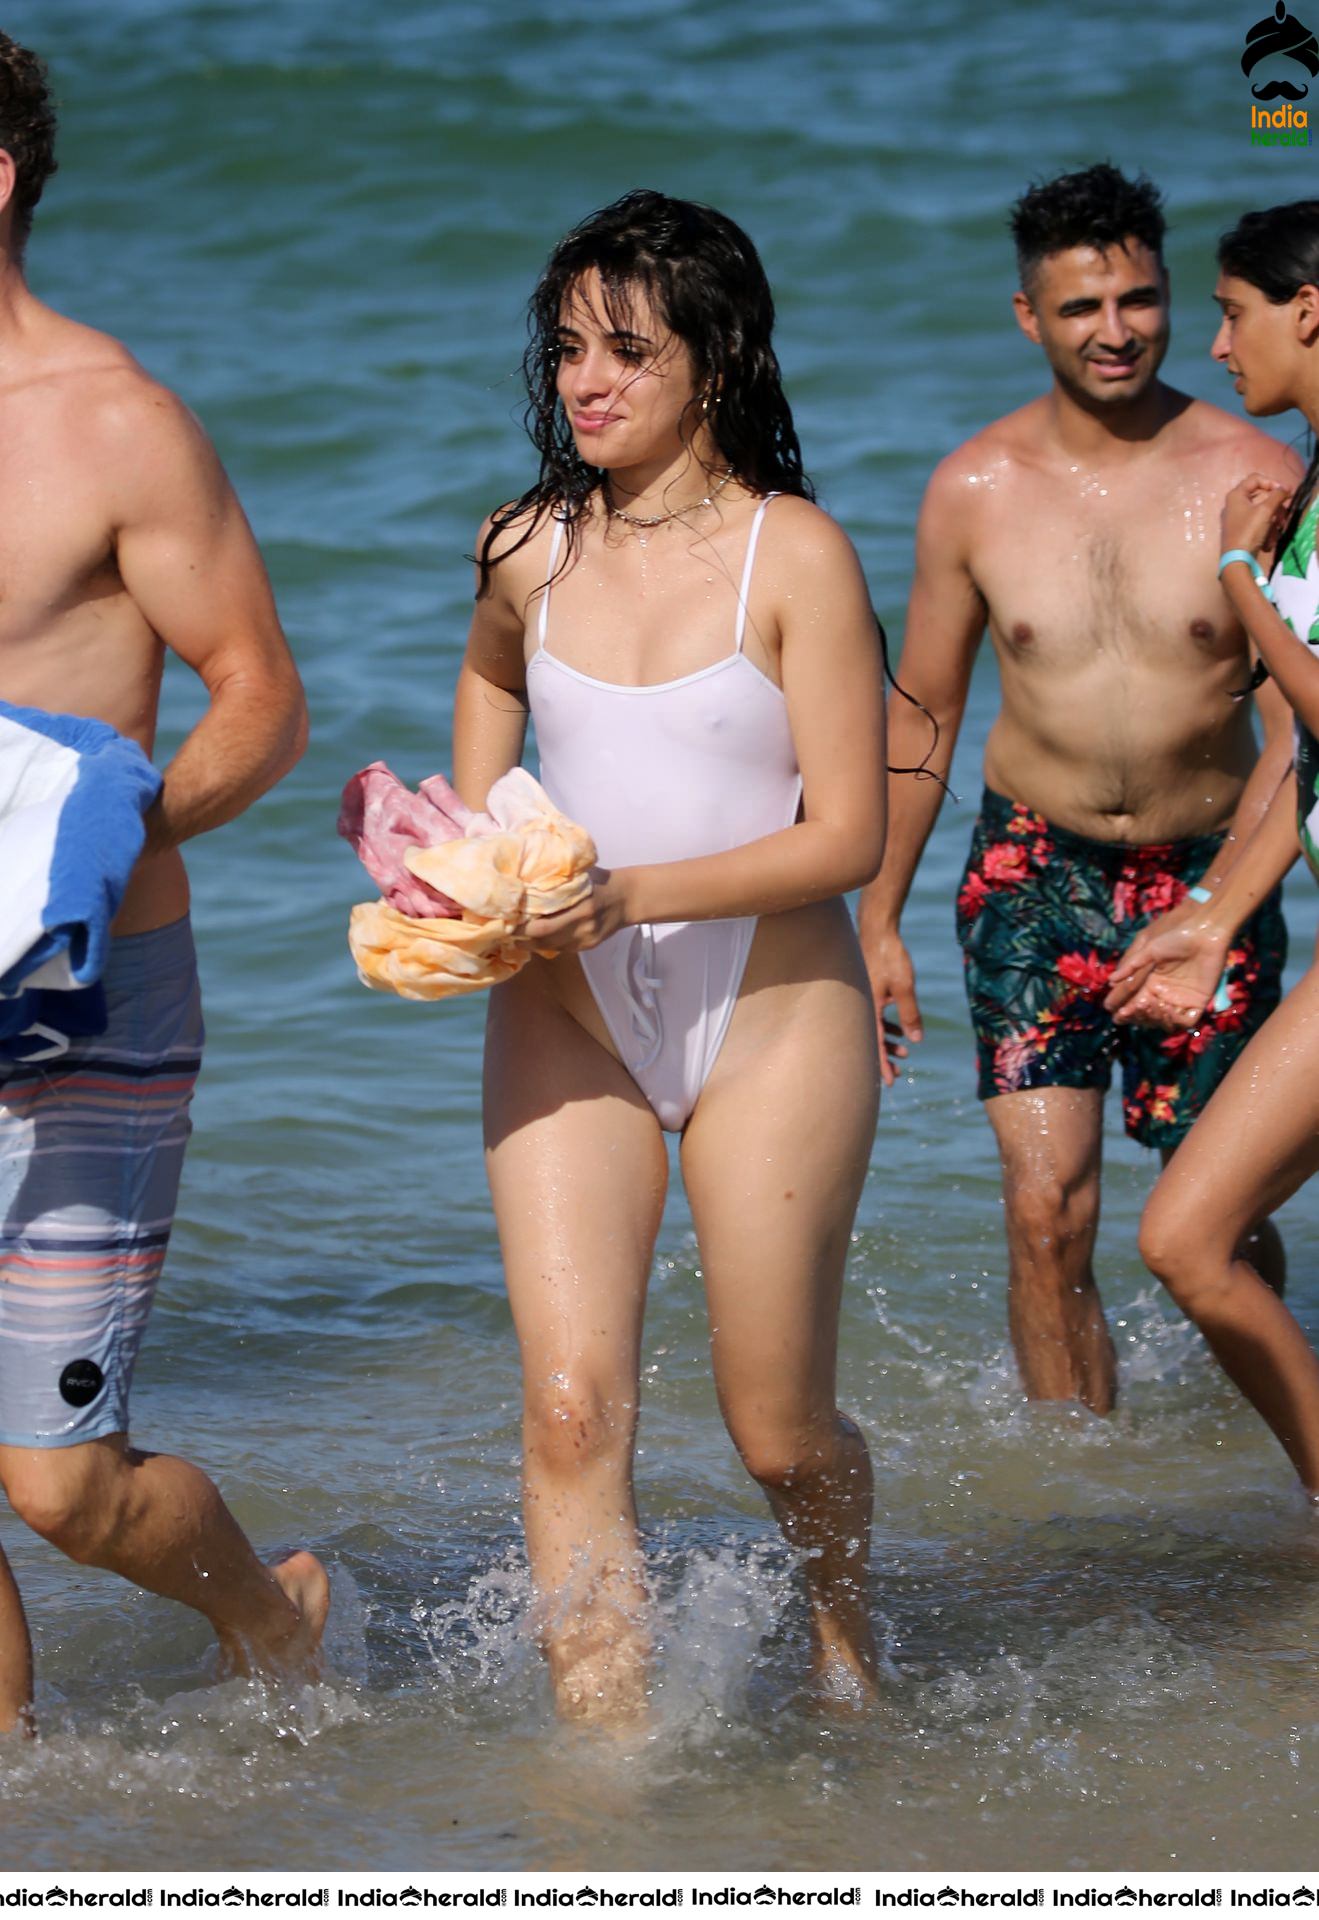 Camila Cabello and Shawn Mendes at a Beach in Miami Set 2